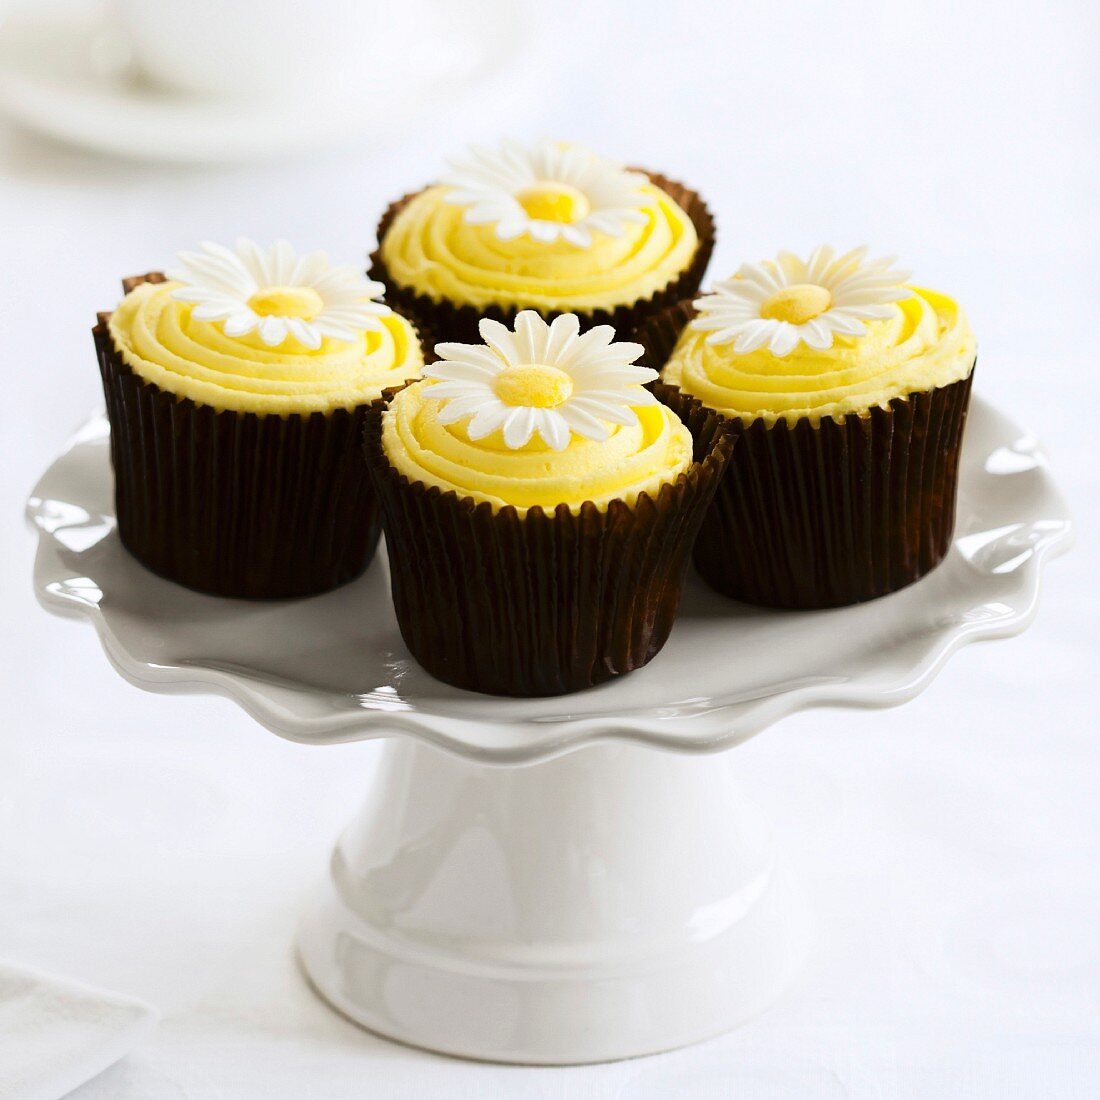 Yellow cupcakes on a white cakestand